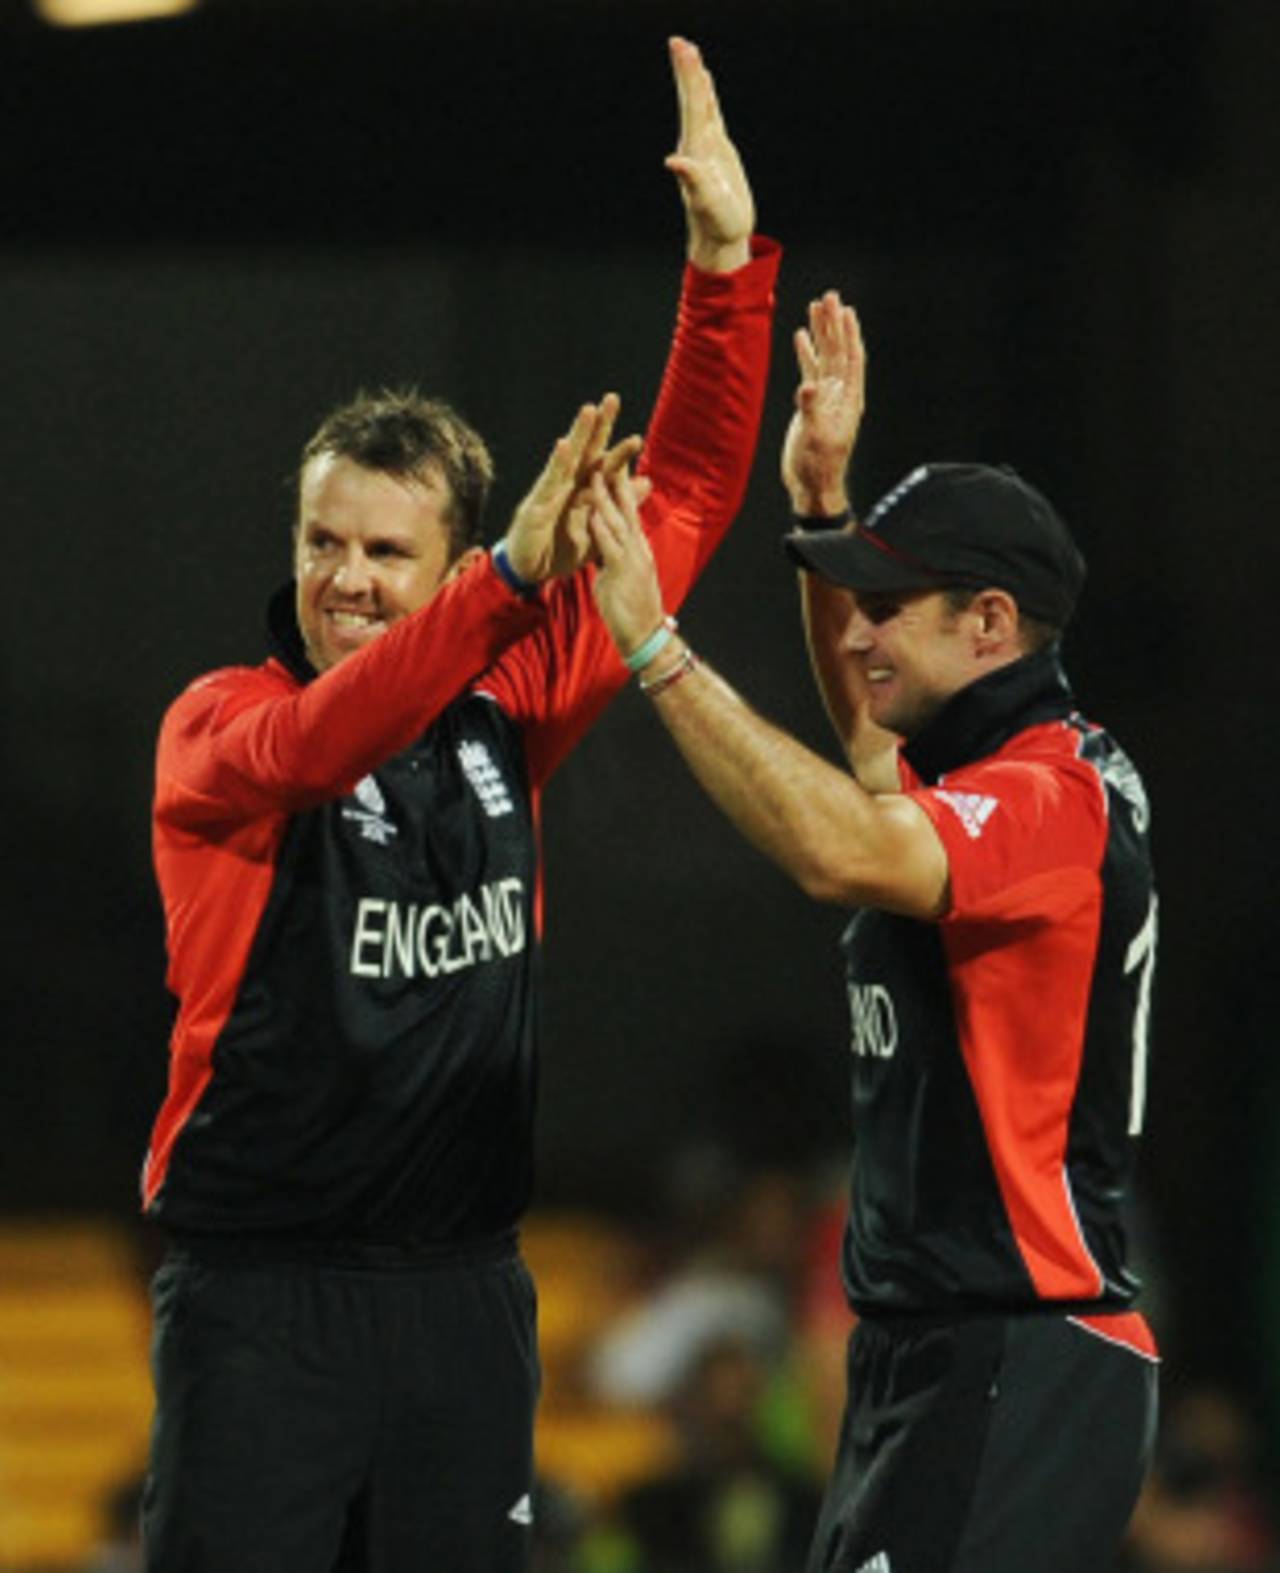 Graeme Swann revived England's spirit in the field with three quick wickets, England v Ireland, World Cup 2011, Bangalore, March 2, 2011